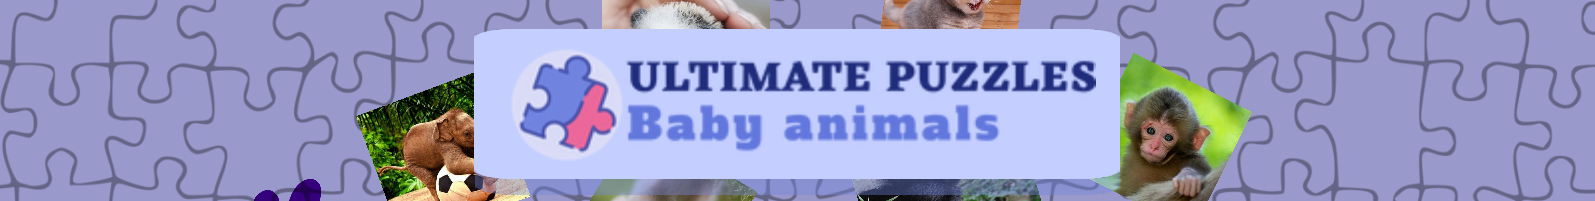 Ultimate Puzzles Baby Animals